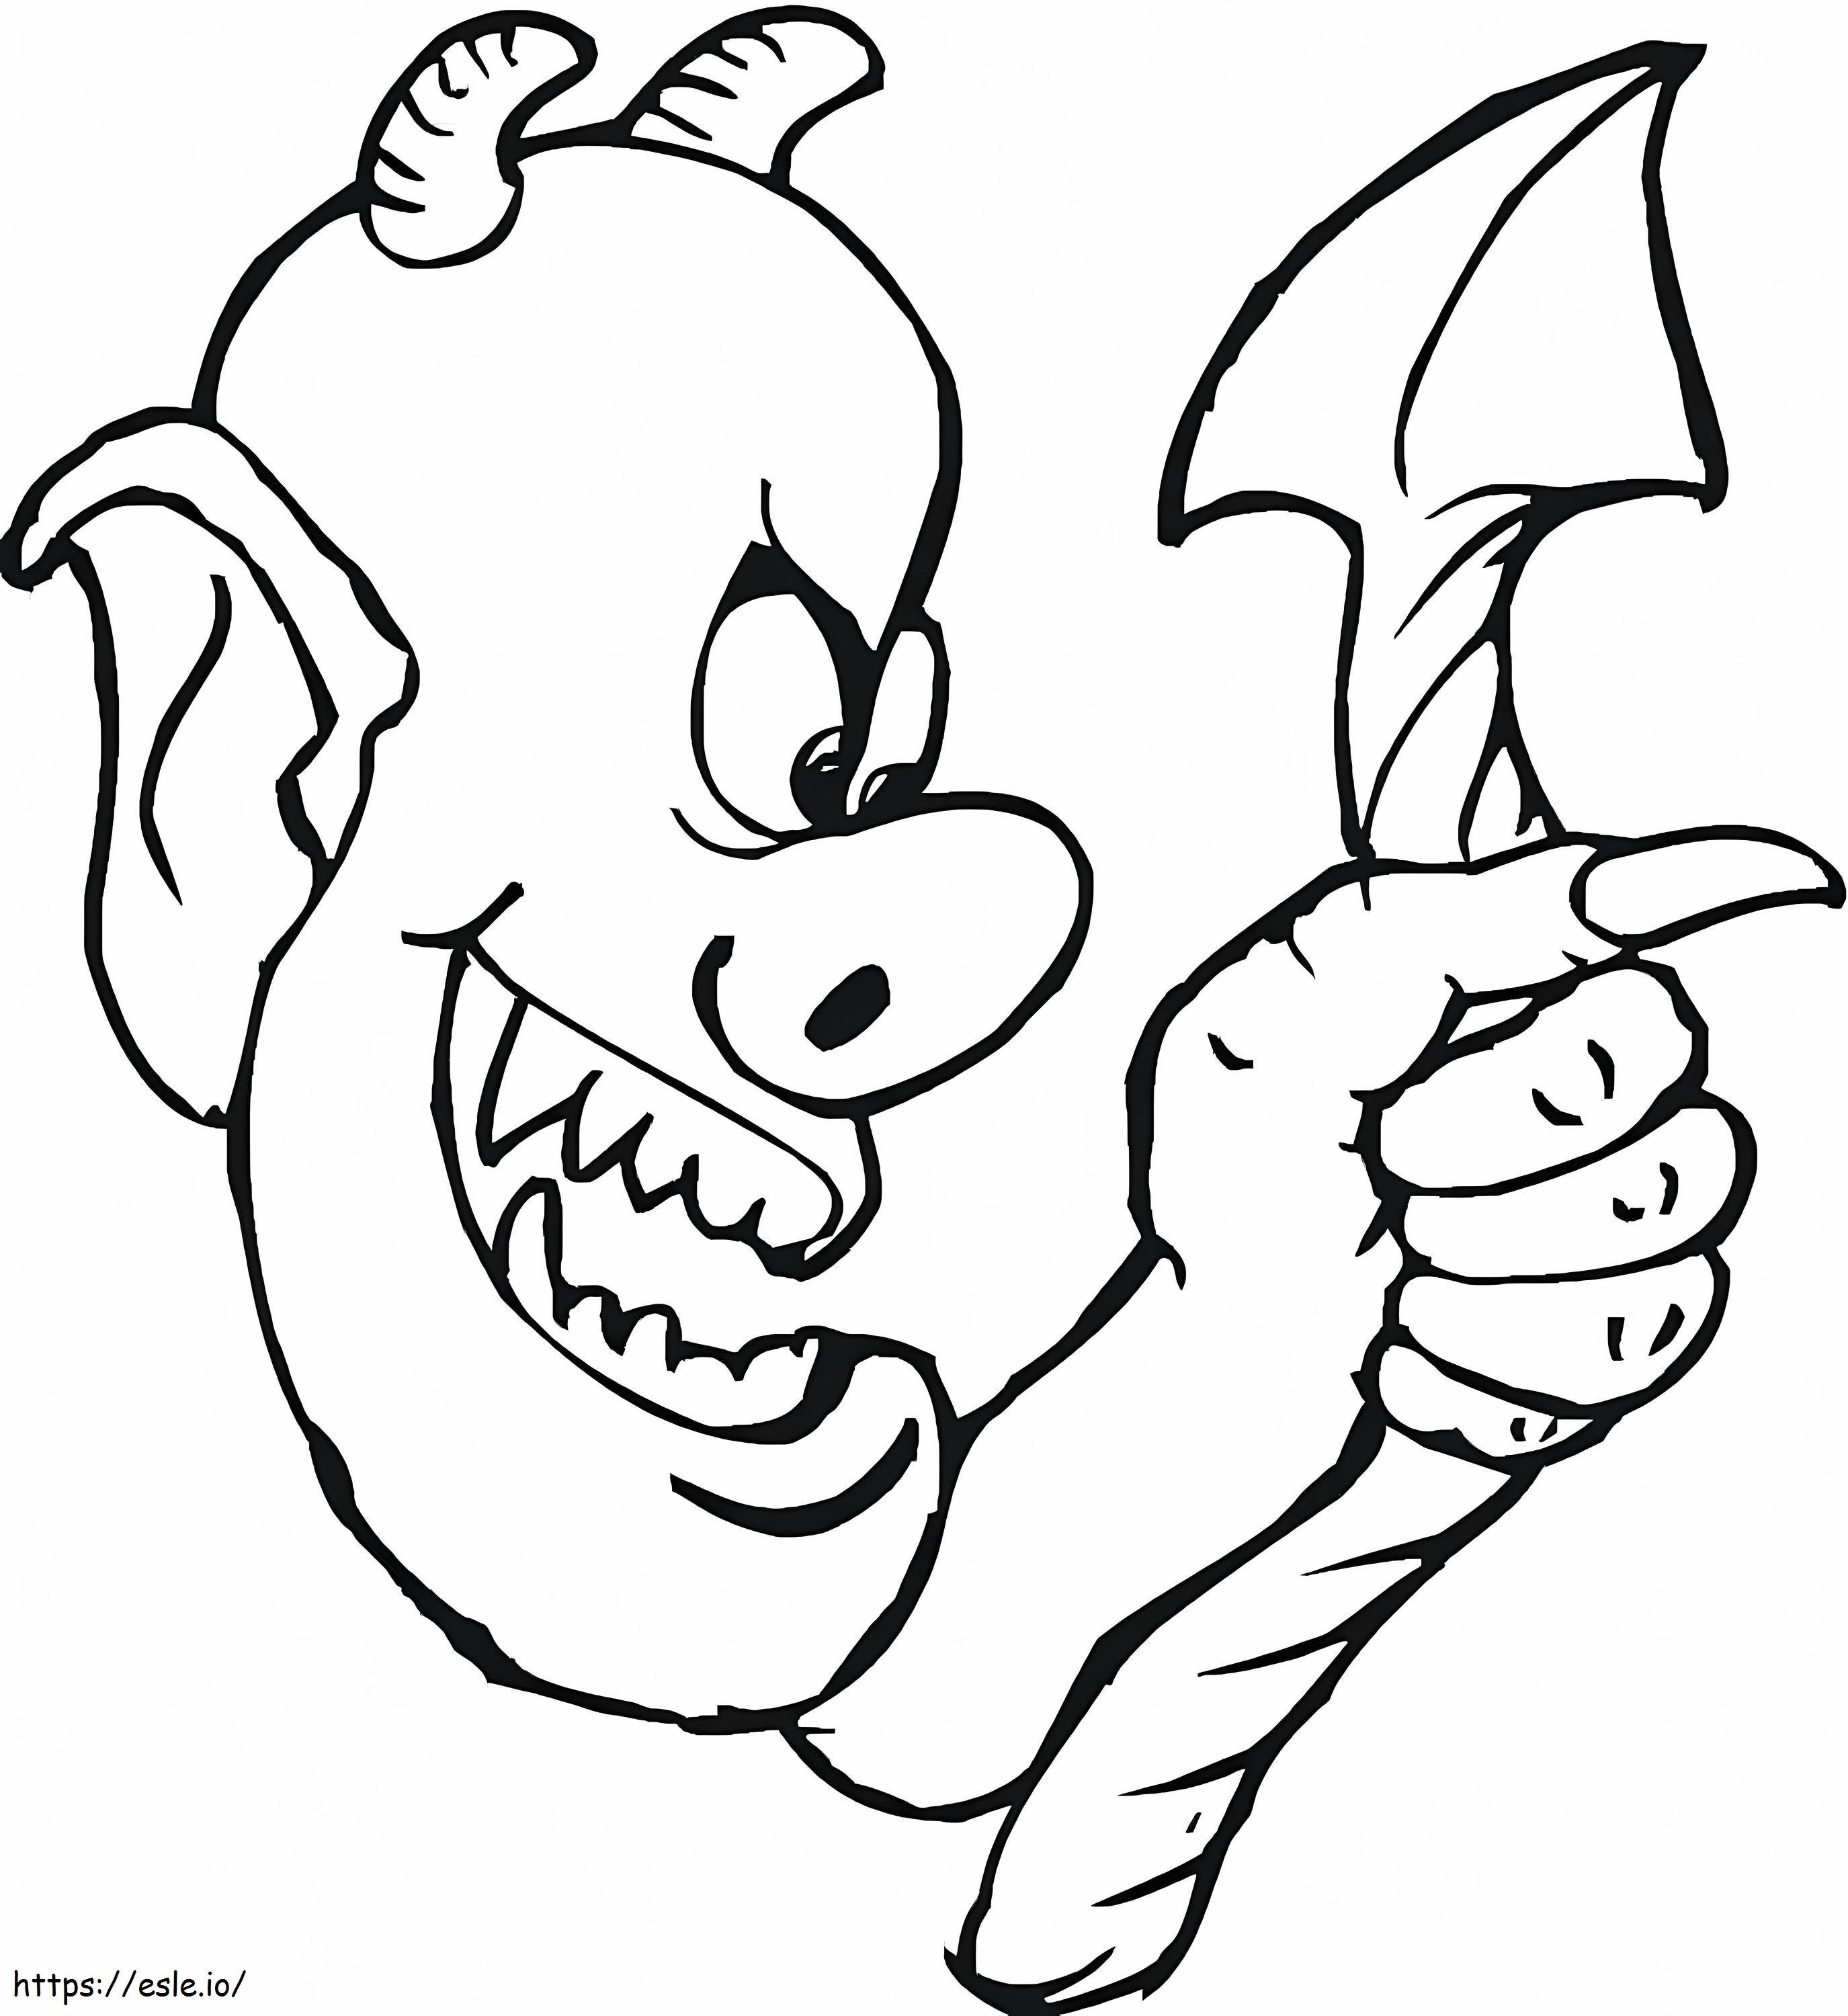 Horror Demon coloring page